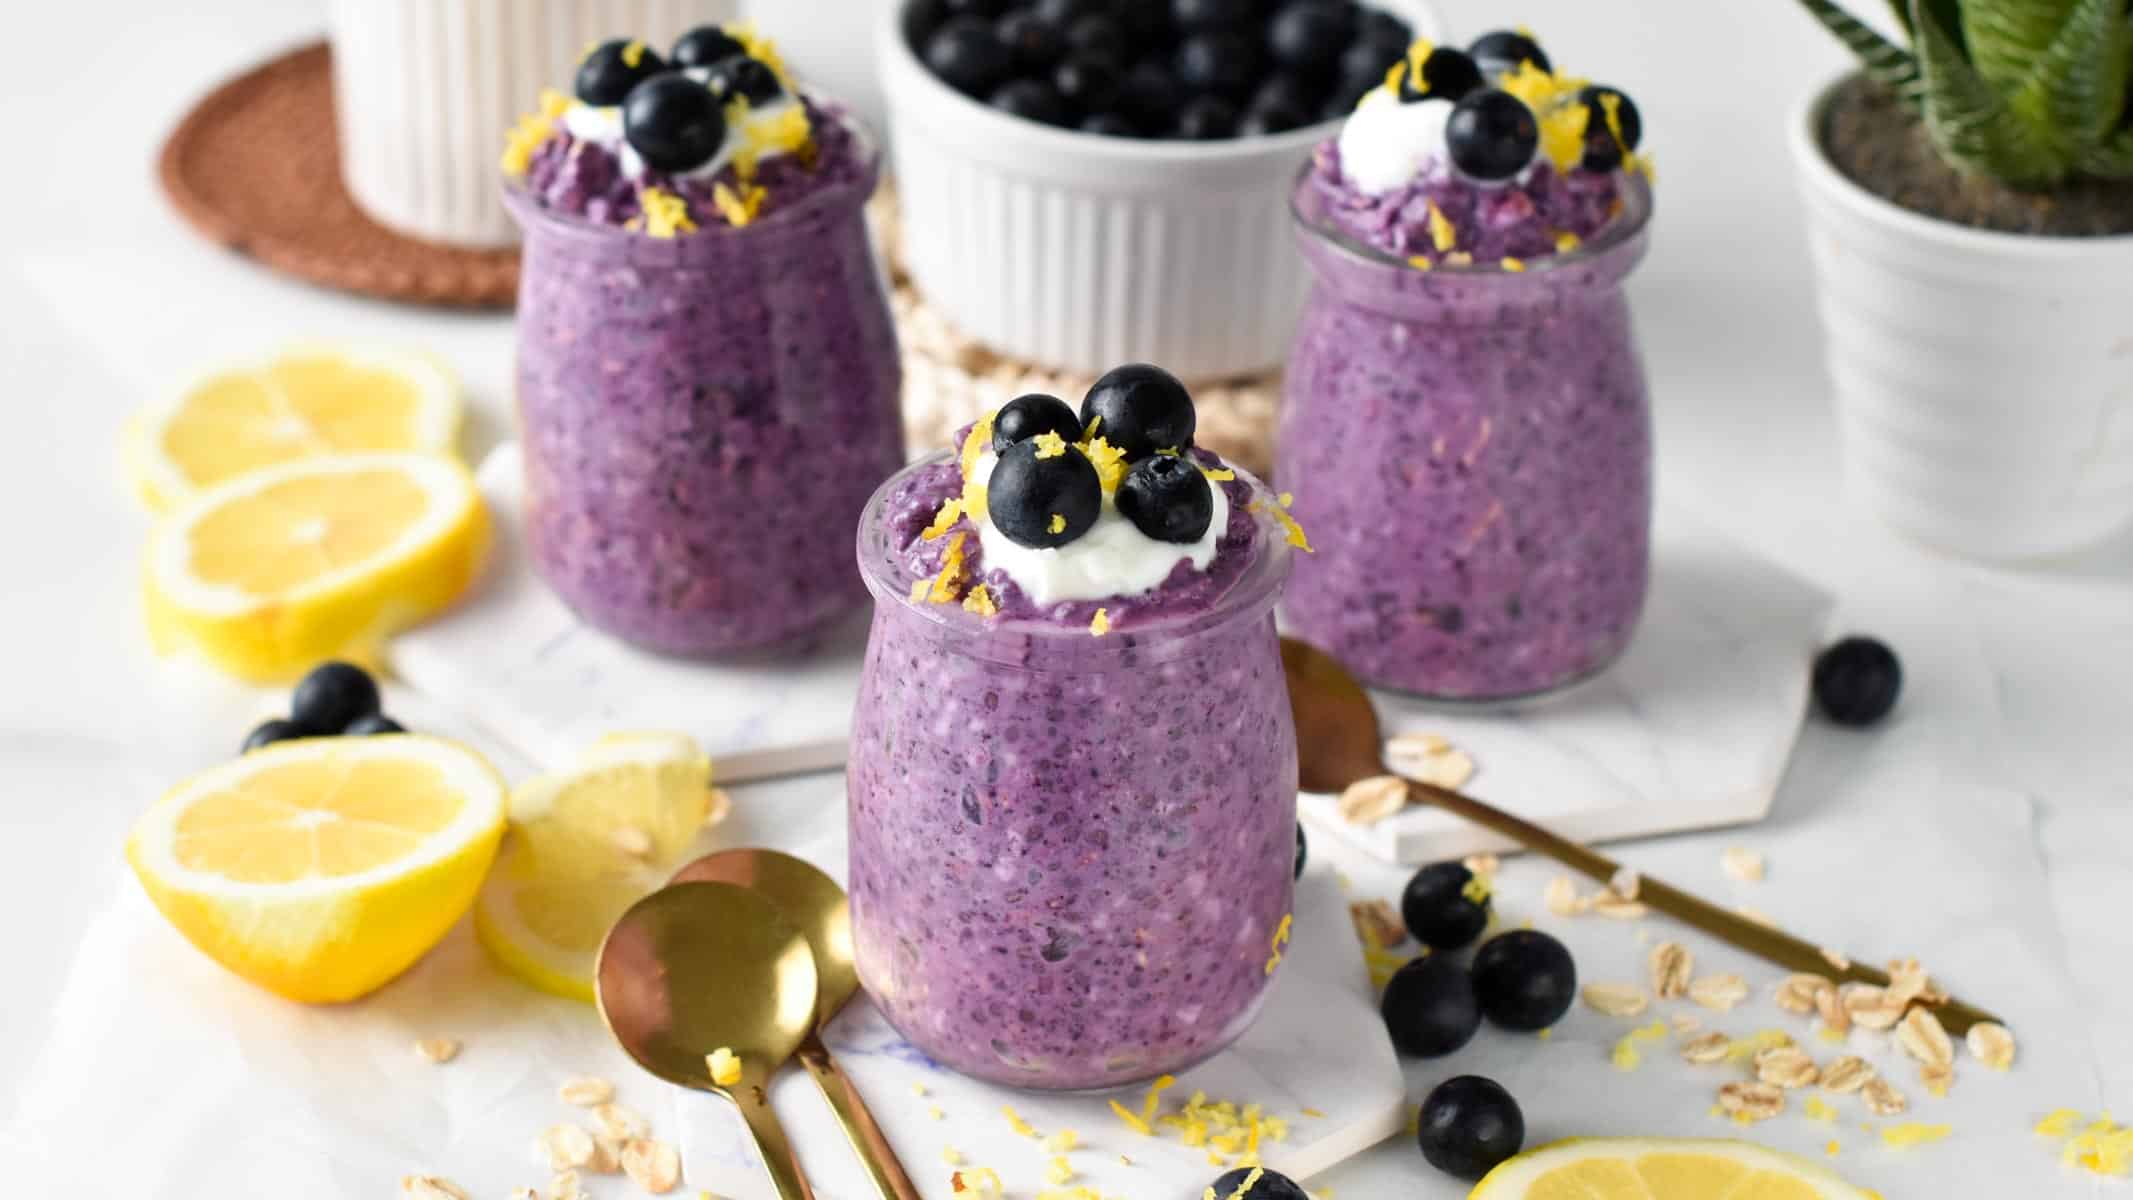 Overnight Oats with Yogurt and Blueberries (to Share with the Kids)